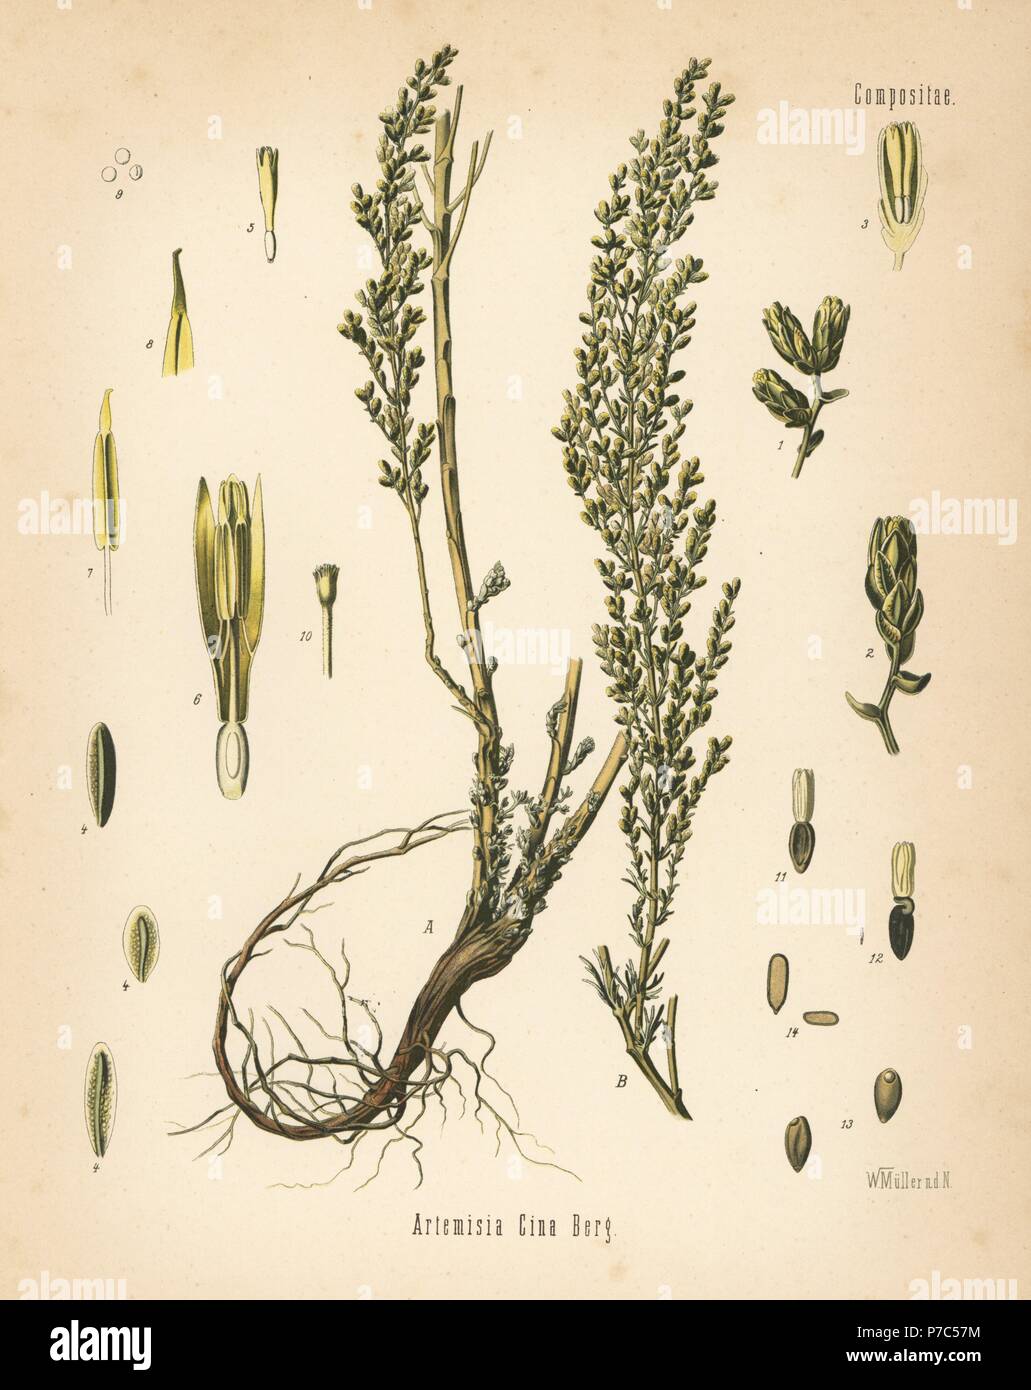 Santonica or wormseed, Artemisia cina. Chromolithograph after a botanical illustration by Walther Muller from Hermann Adolph Koehler's Medicinal Plants, edited by Gustav Pabst, Koehler, Germany, 1887. Stock Photo